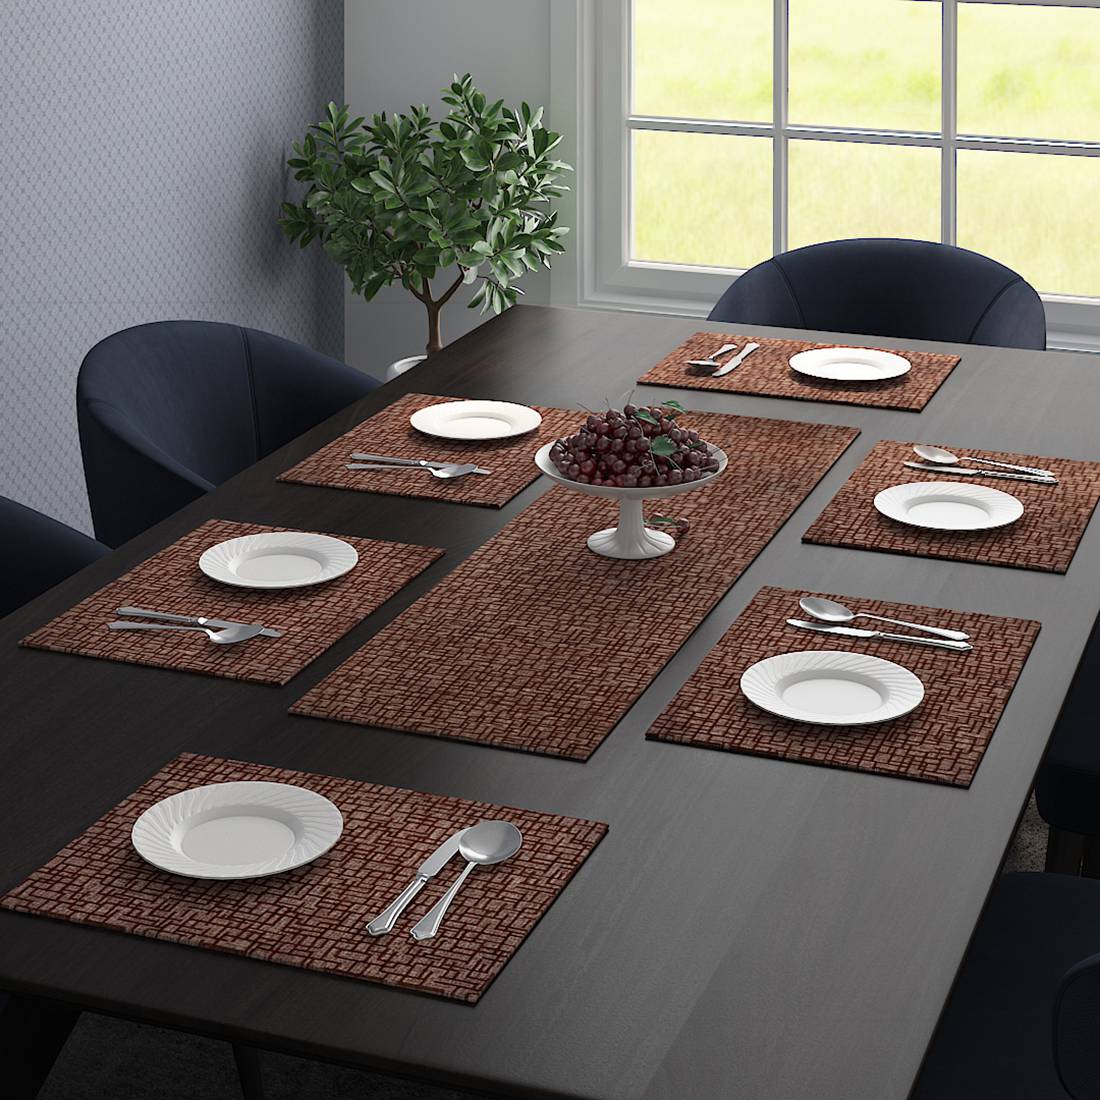 How Dining Table Mats Instantly Accentuate Your Interiors and Offer Superior Functionality